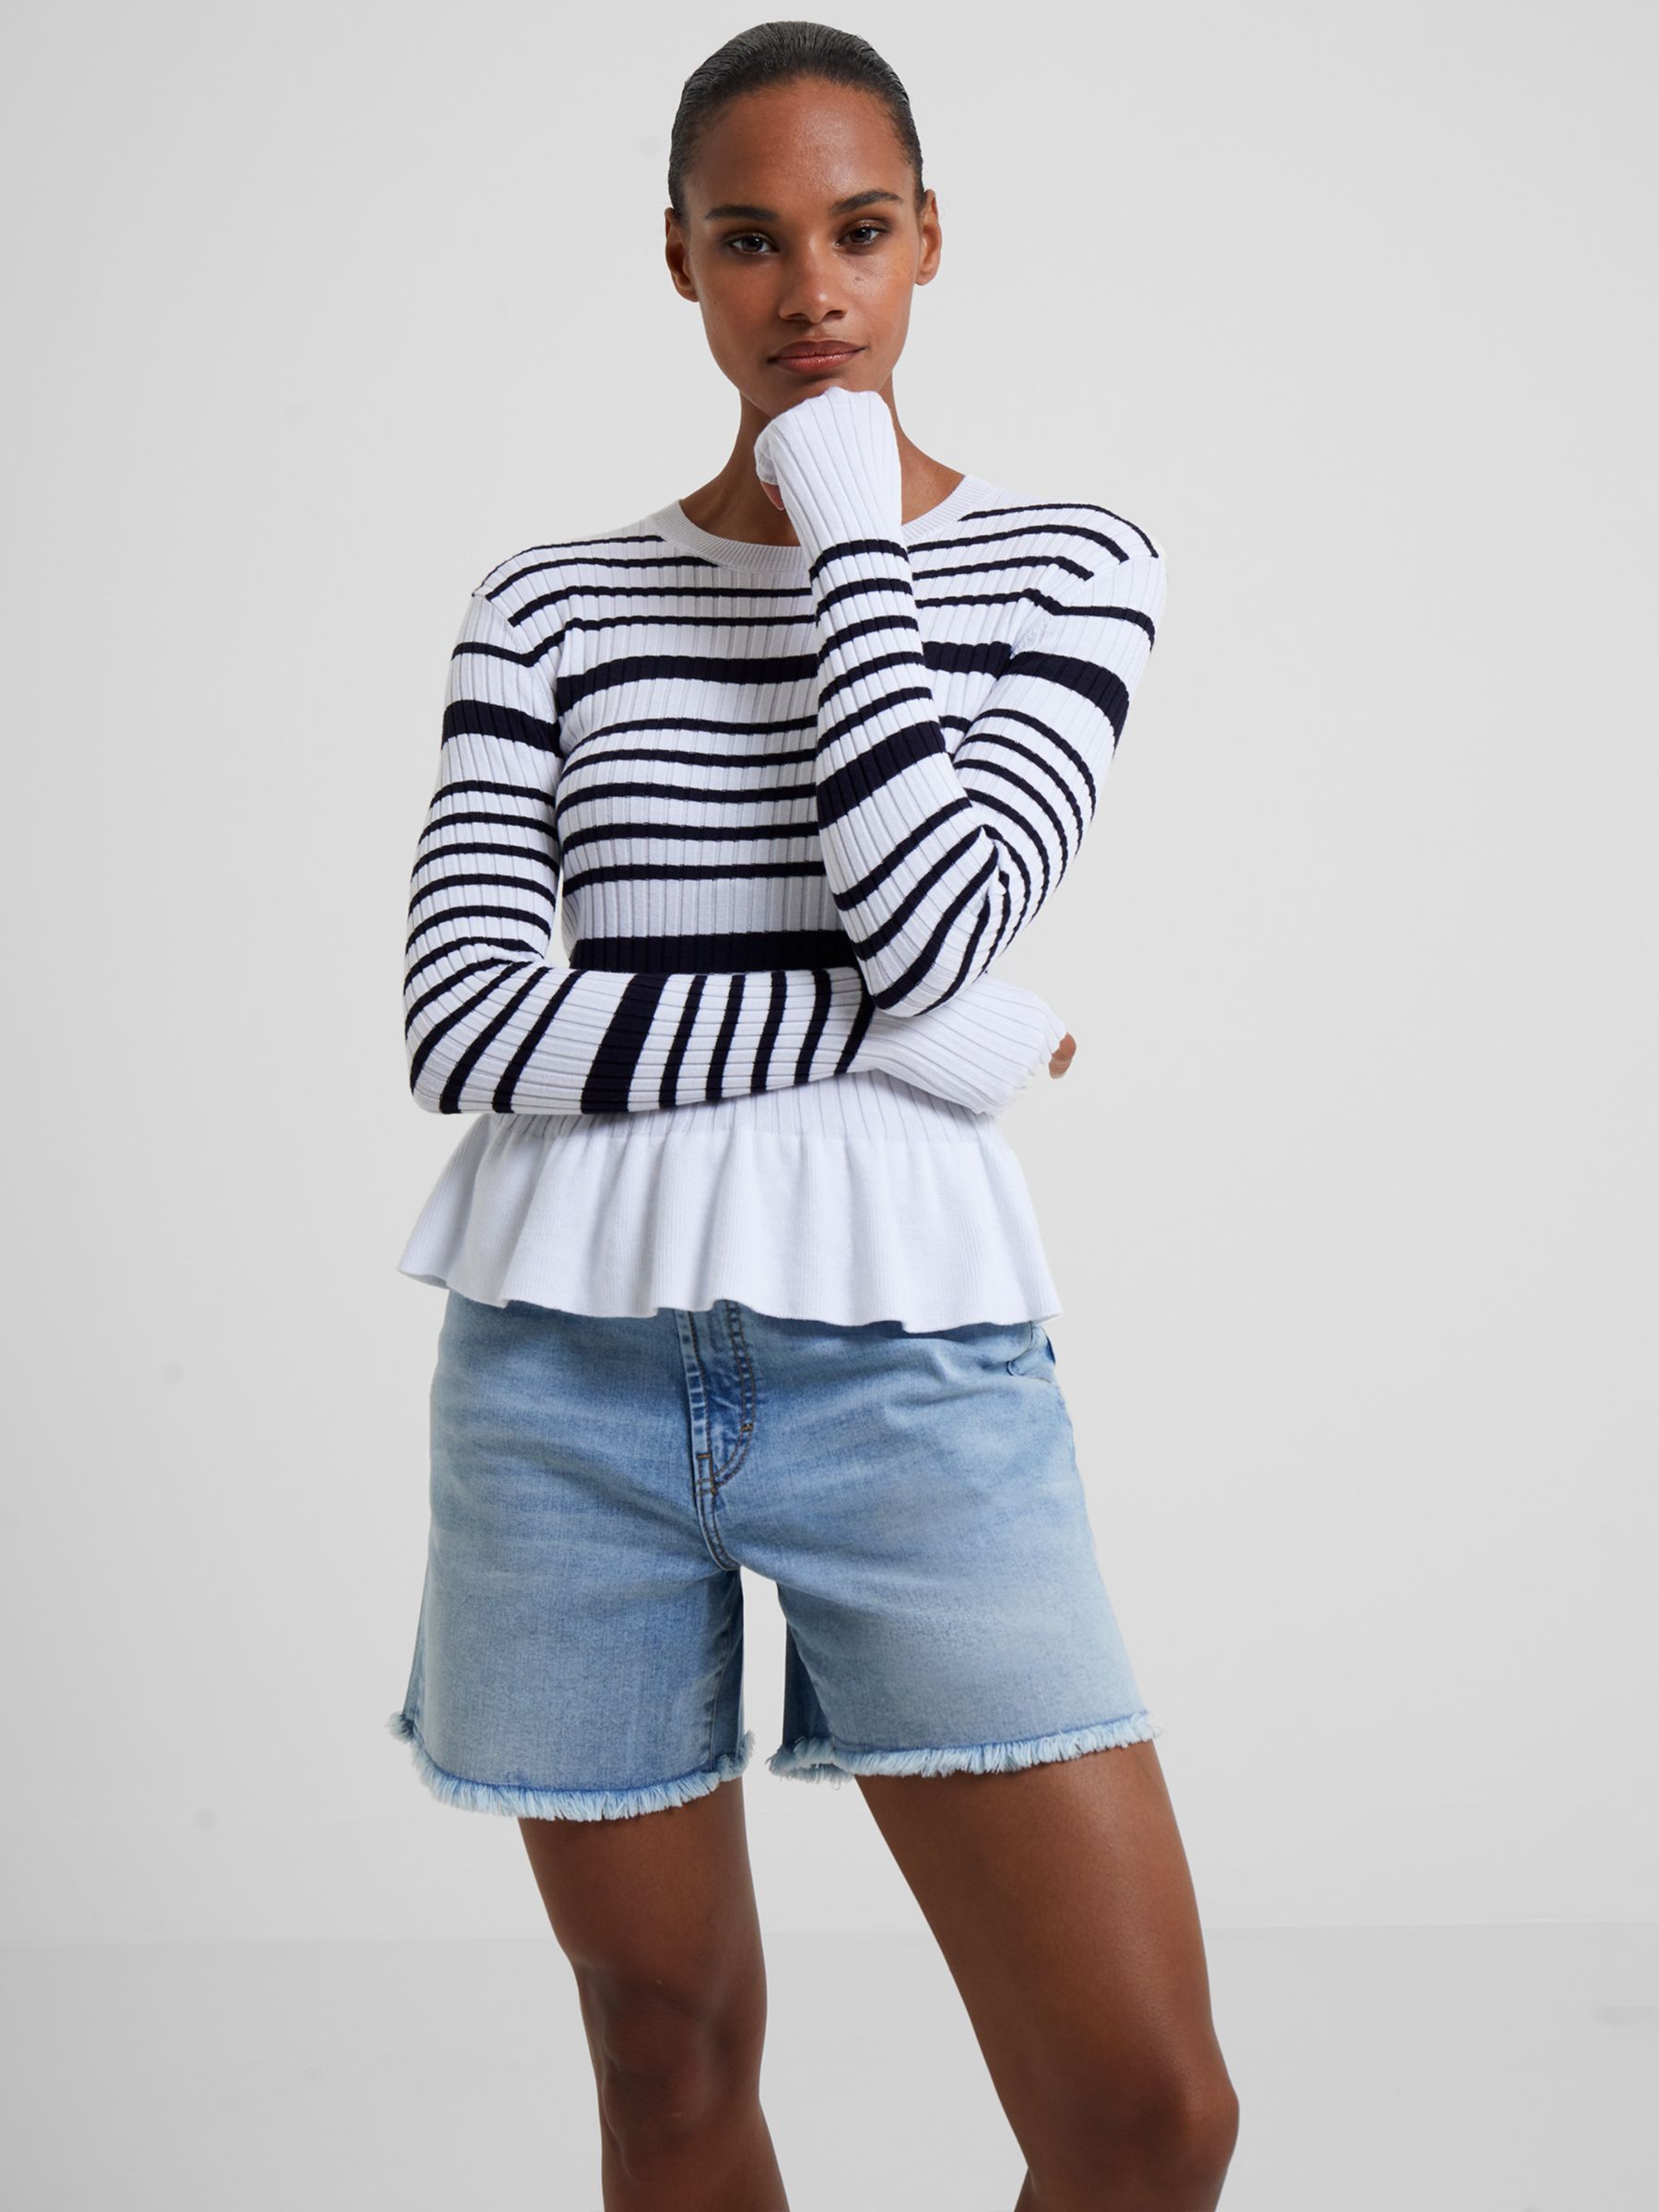 French Connection Onna Breton Jumper, White/Black at John Lewis & Partners